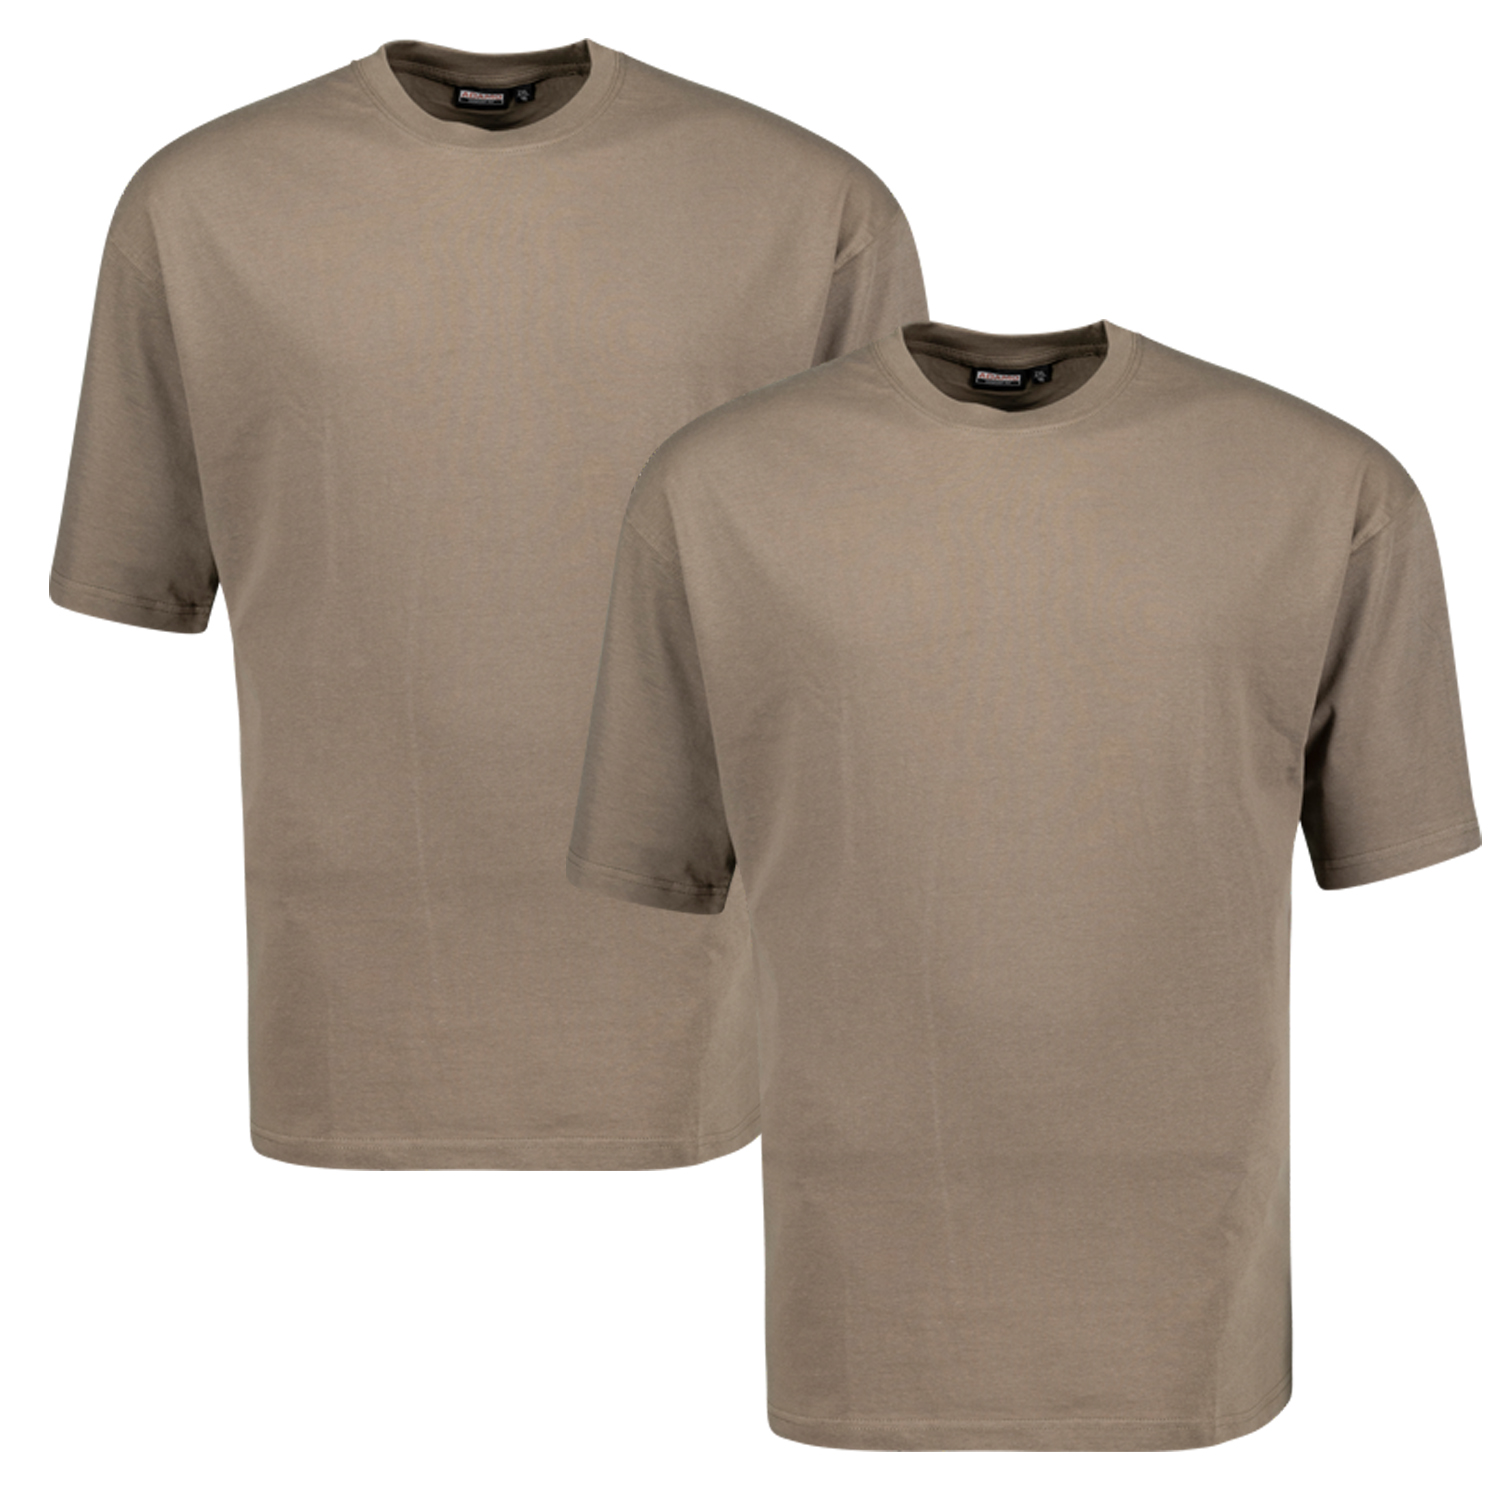 Double pack olive MARLON t-shirt COMFORT FIT by ADAMO up to kingsize 12XL